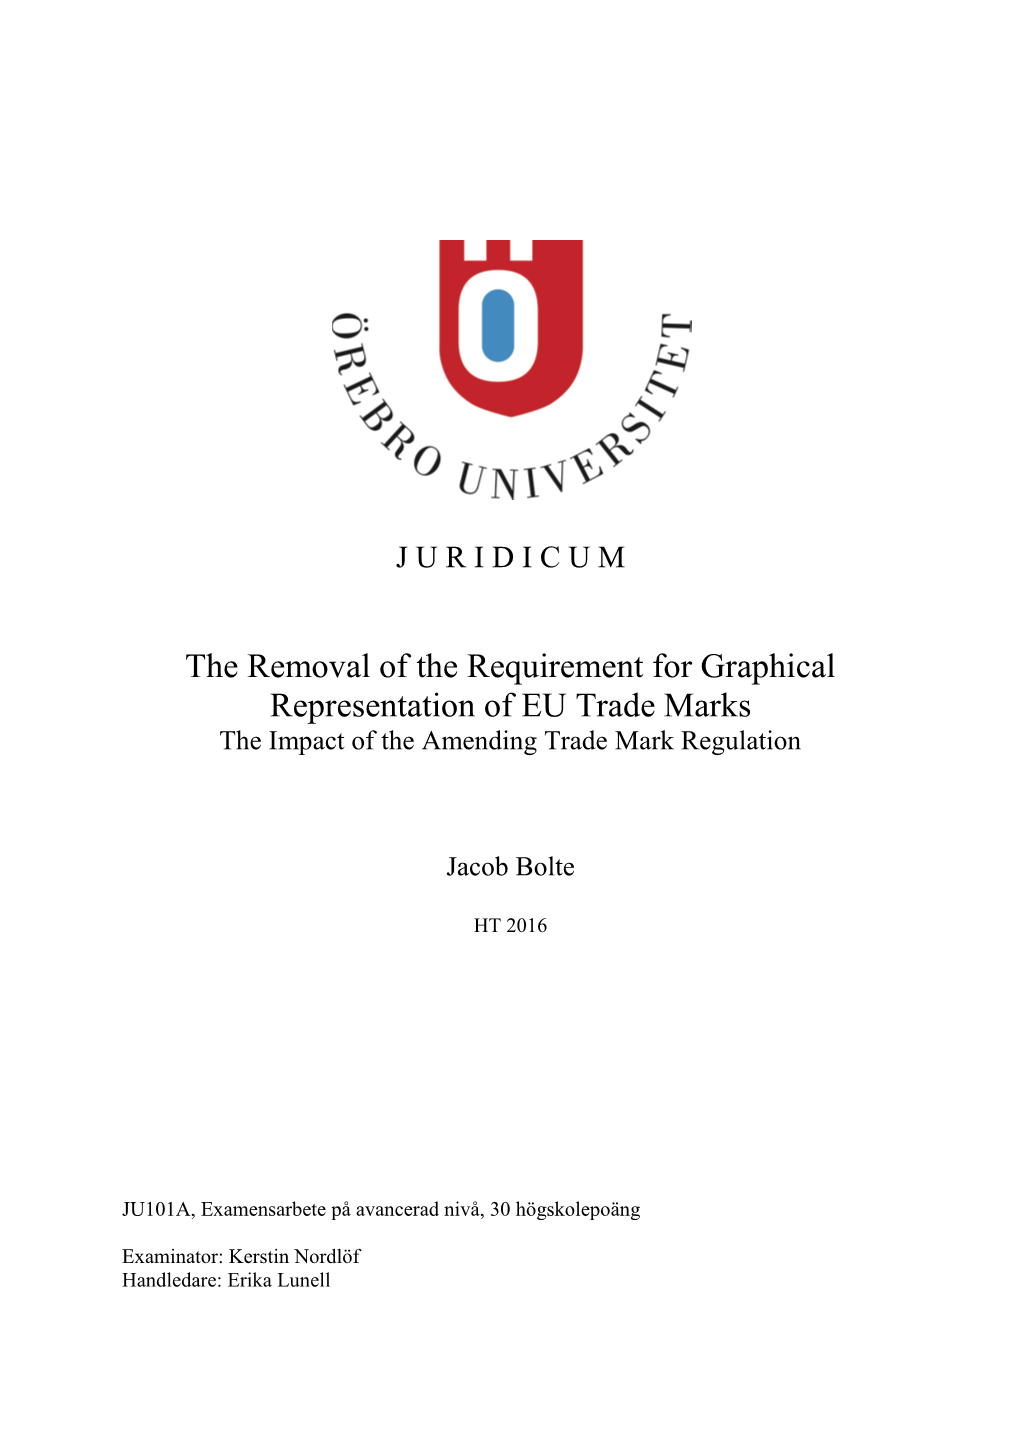 The Removal of the Requirement for Graphical Representation of EU Trade Marks the Impact of the Amending Trade Mark Regulation